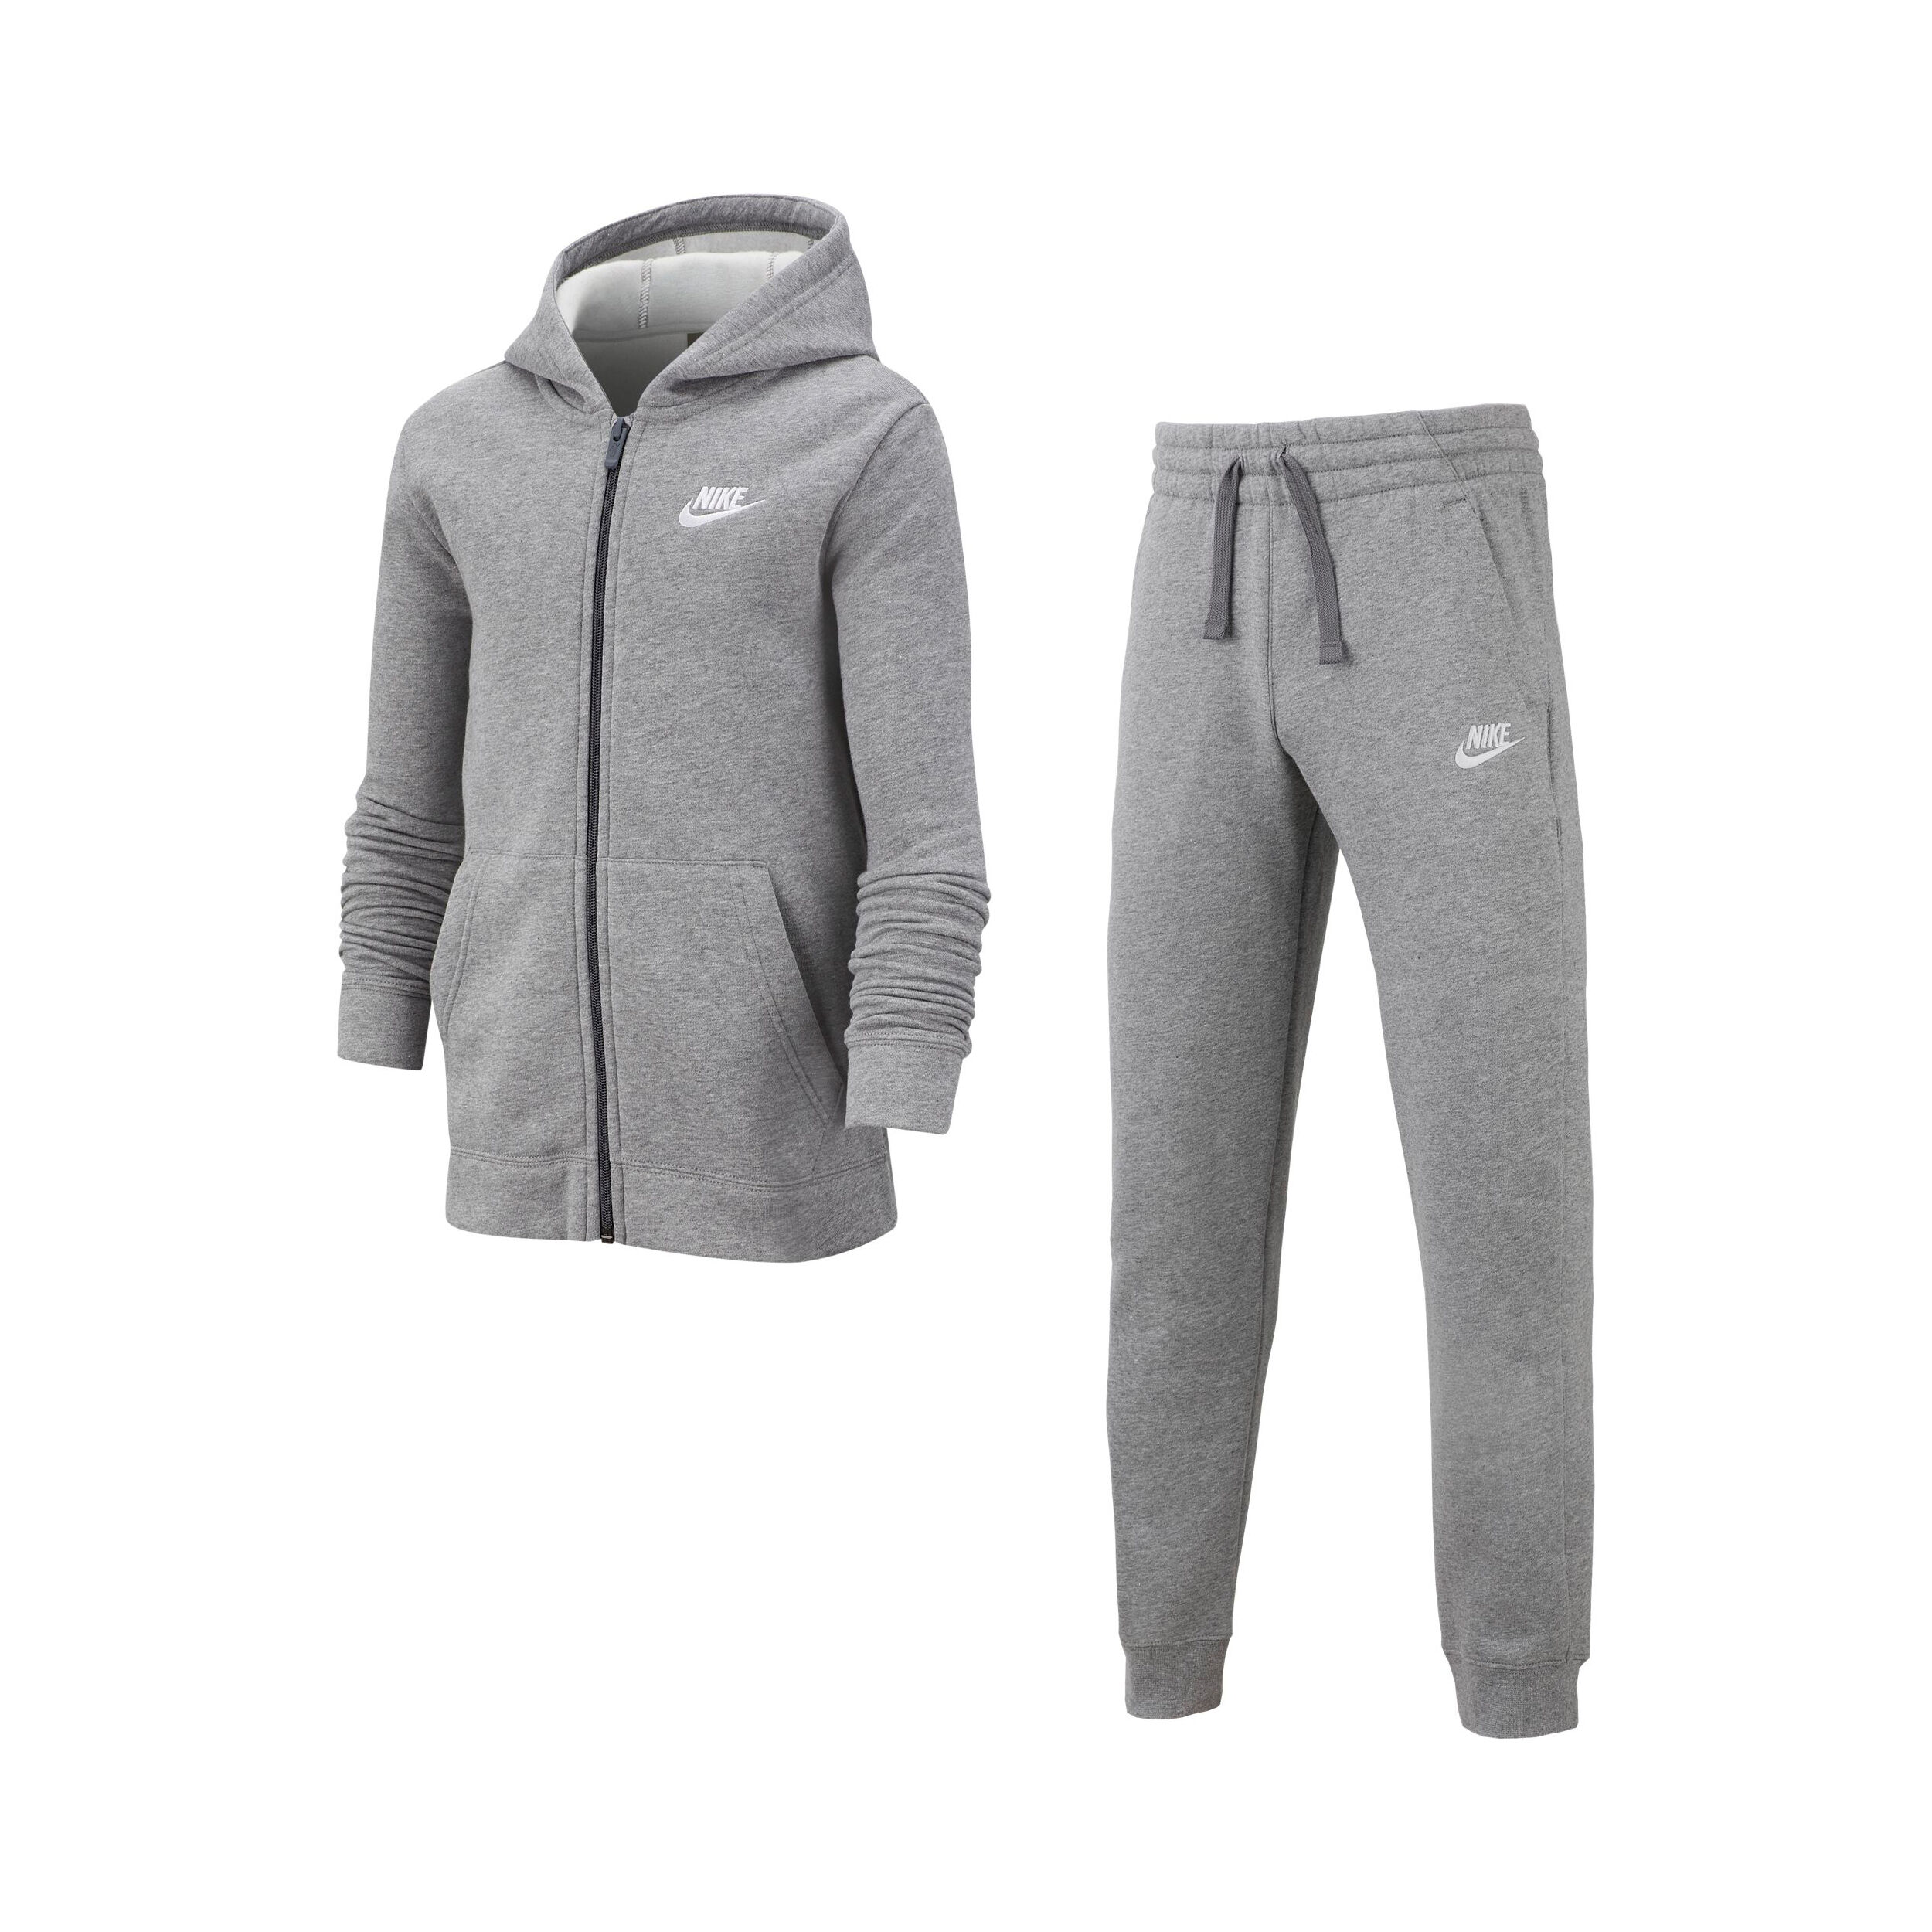 grey and white nike tracksuit